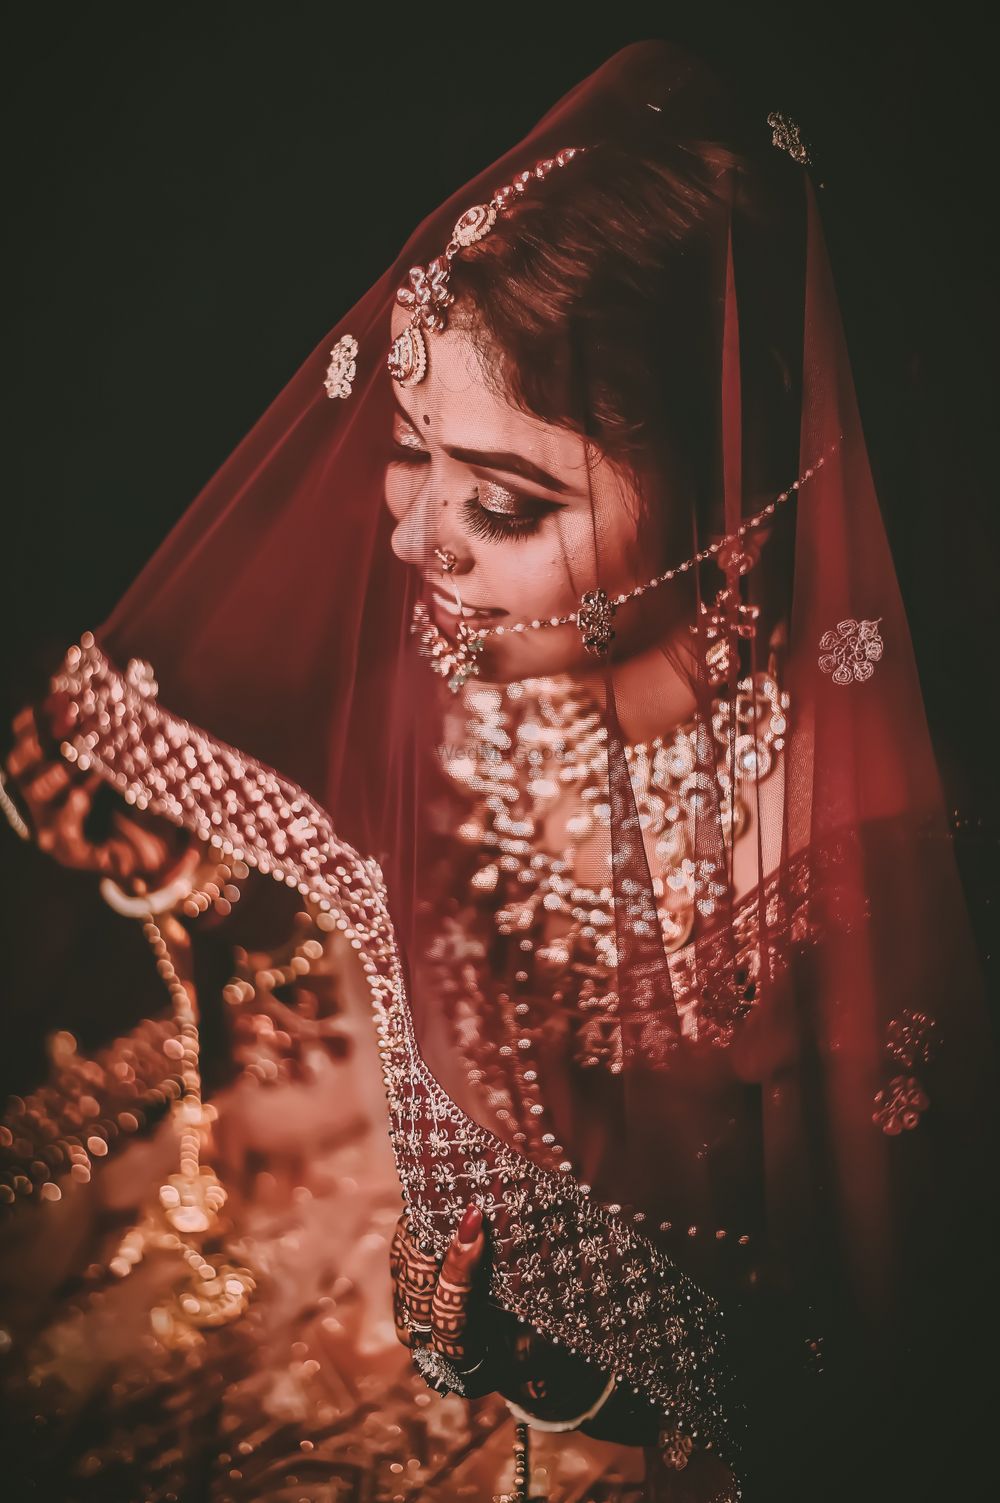 Photo From Bridal Shoots - By Mr Roy Photography